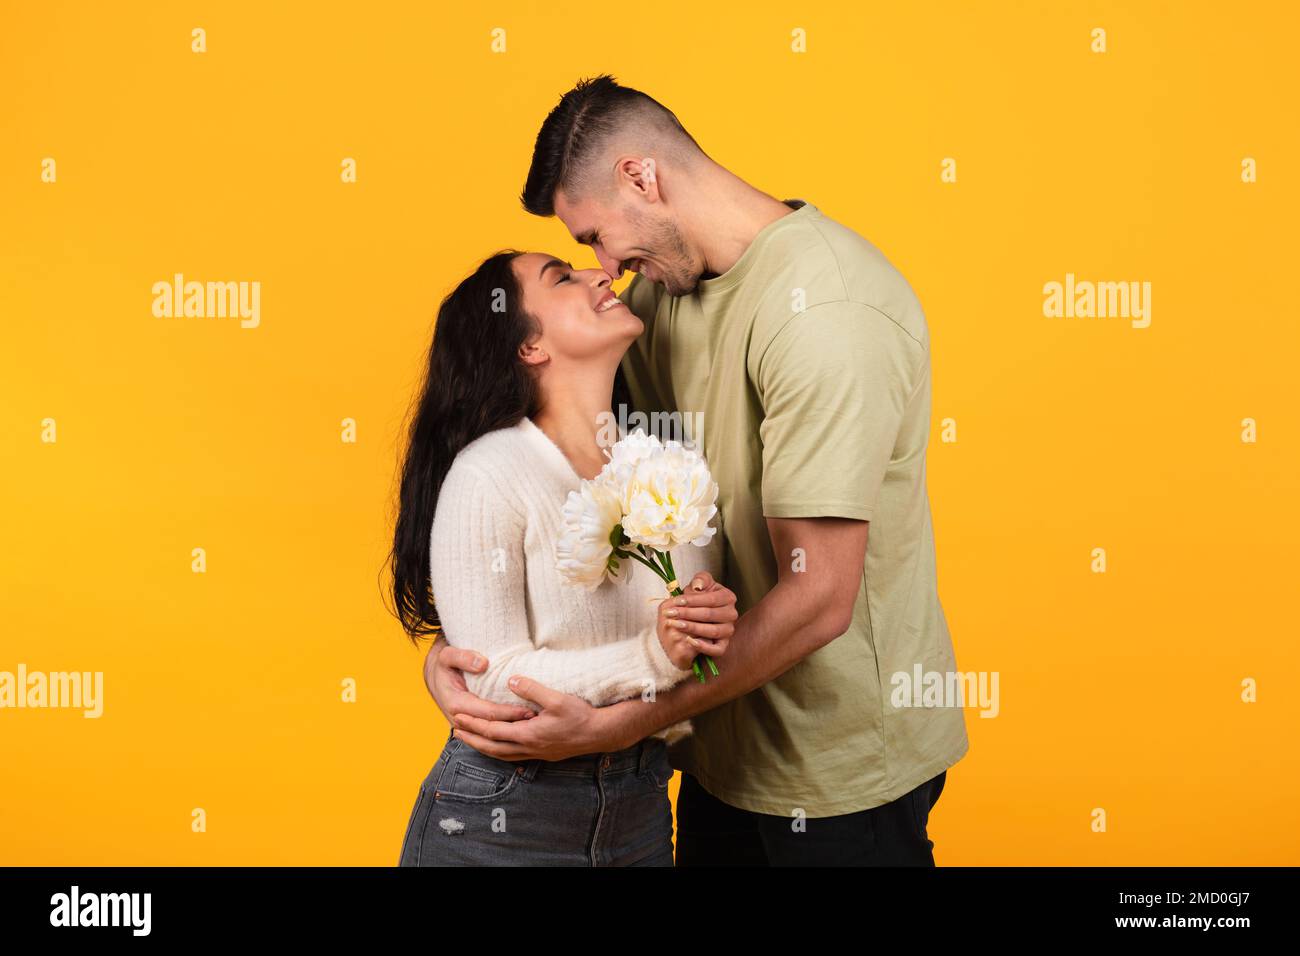 Happy millennial arabic guy hugging lady, gives bouquet of flowers, isolated on orange background, studio Stock Photo